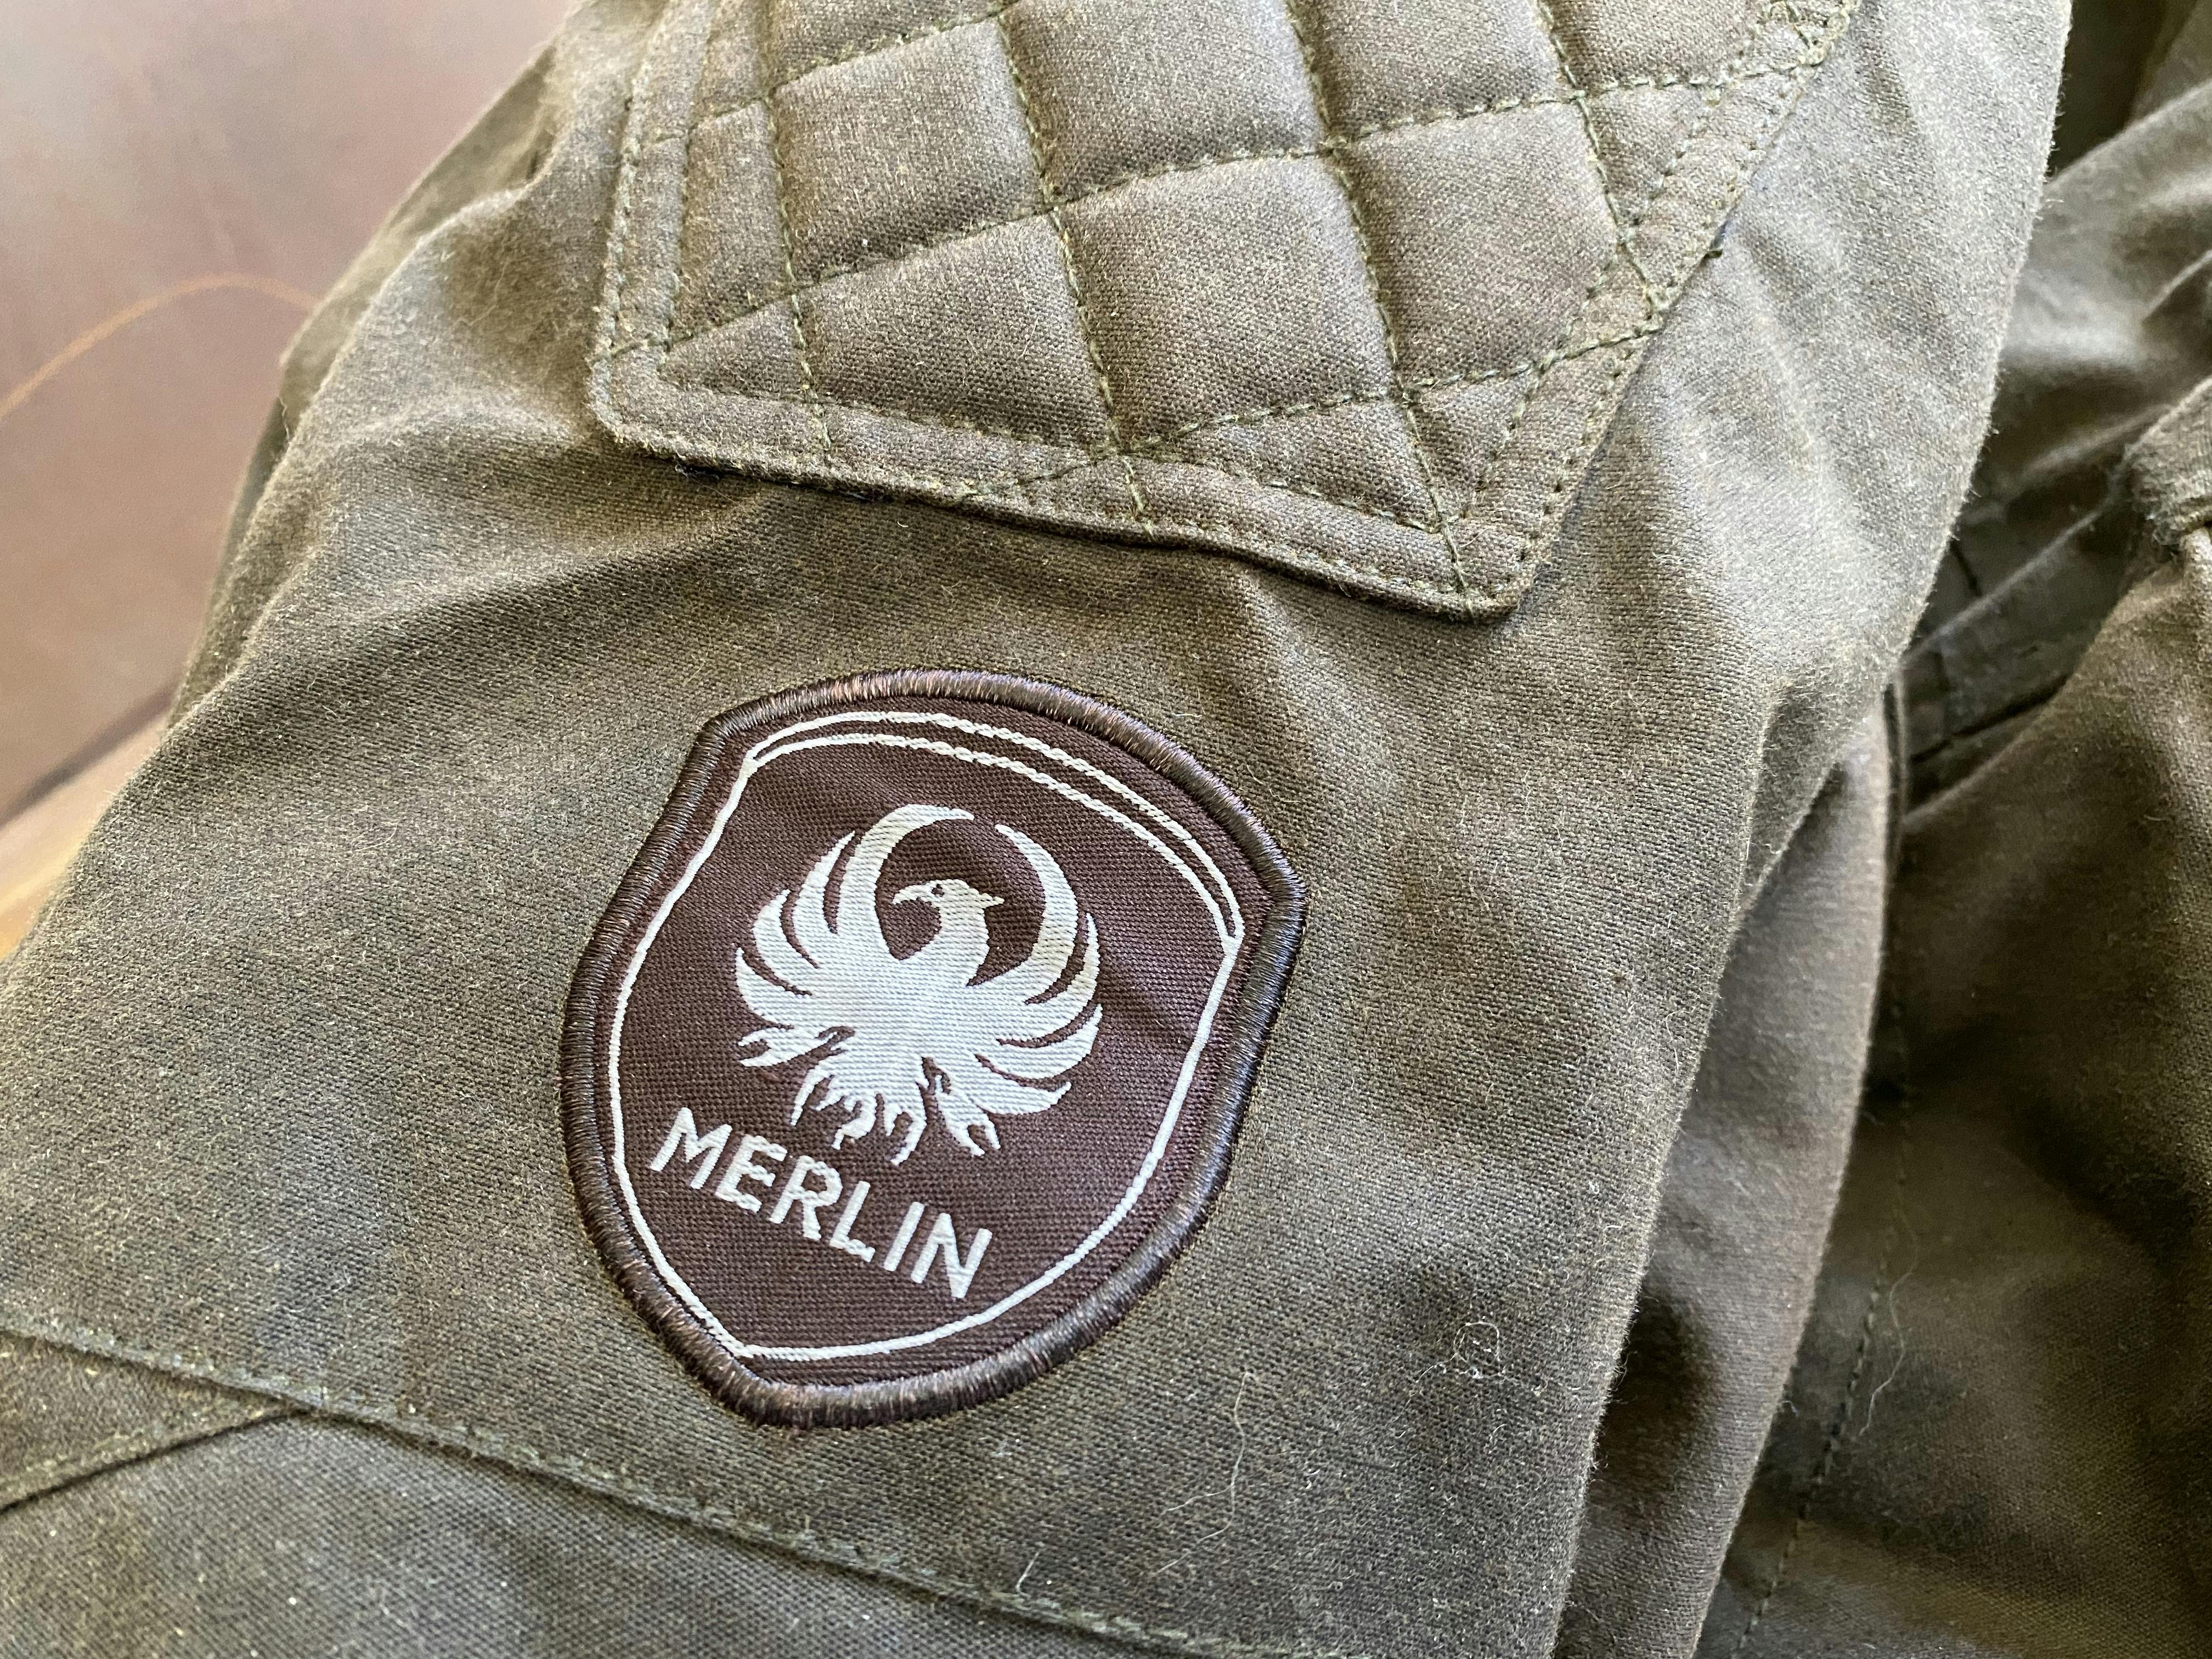 A close up of the shoulder quilting and merlin badge on the Merlin Barton jacket